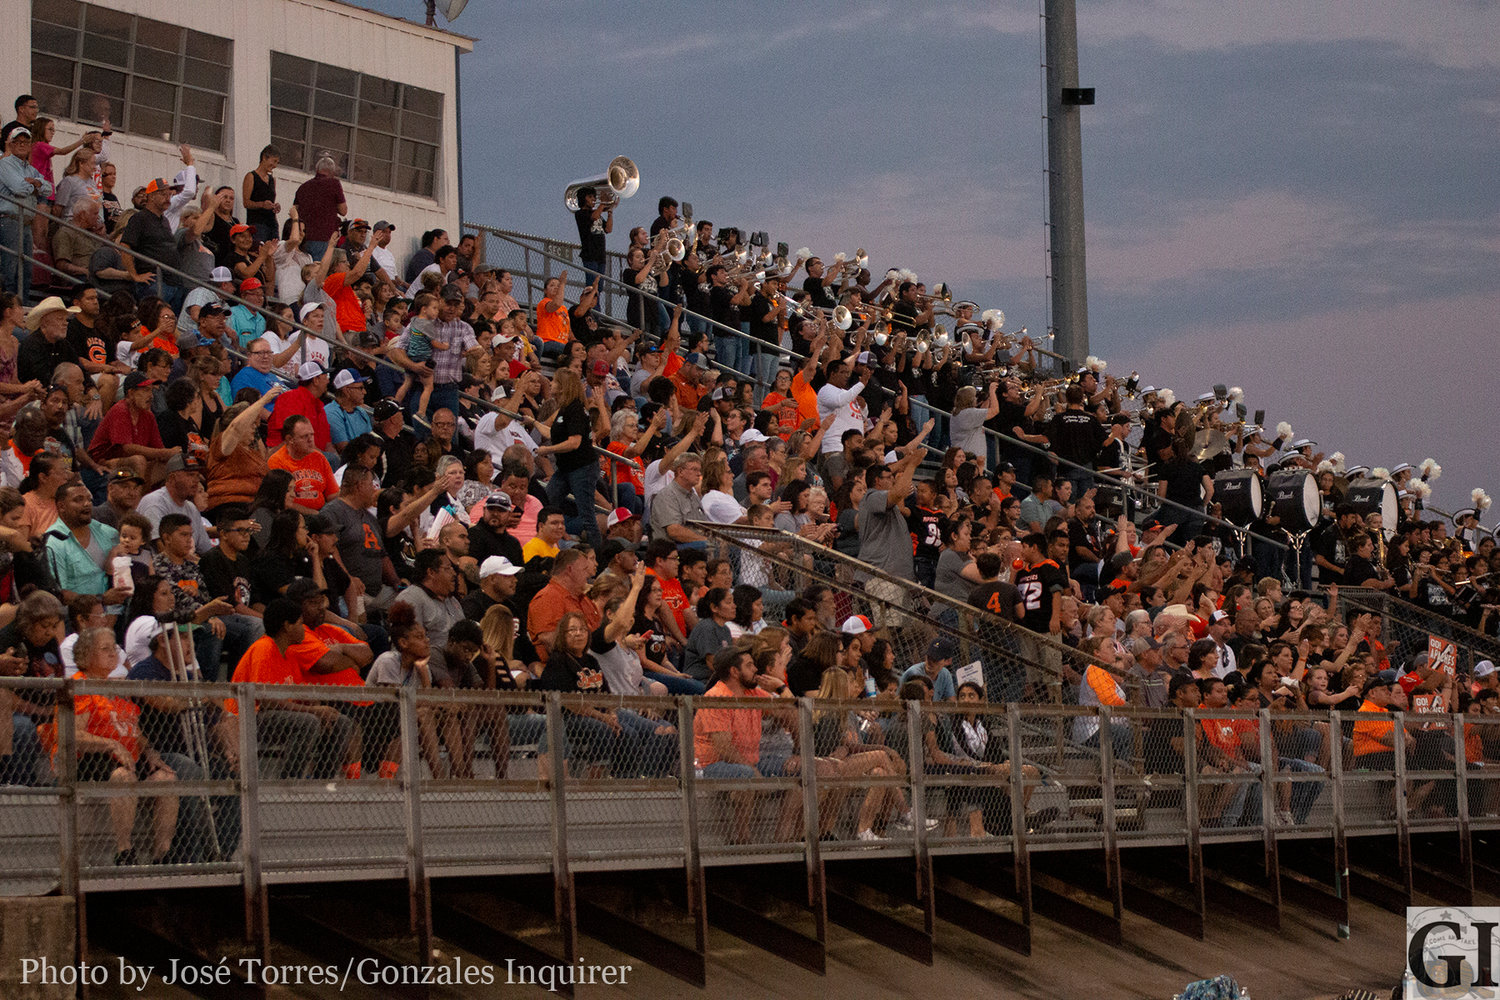 Gonzales Apache fans filled up the away stands in Gonzales' 27-25 victory over Yoakum at Bulldog Stadium.